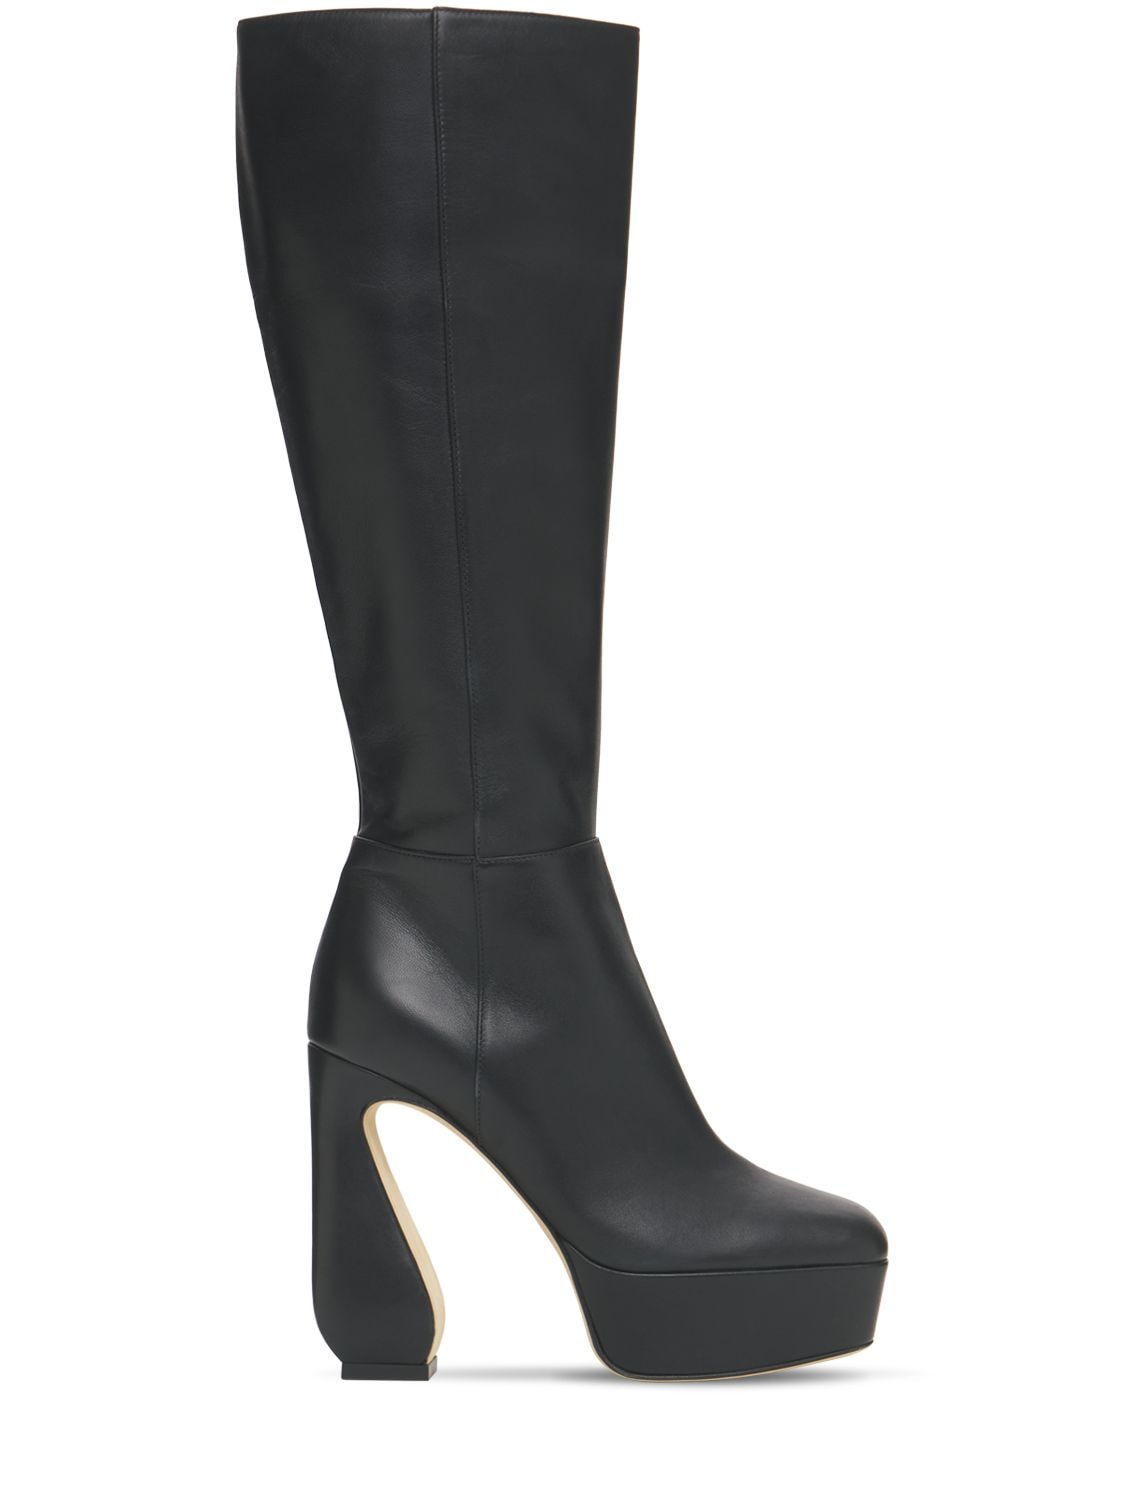 125mm Platform Tall Leather Boots